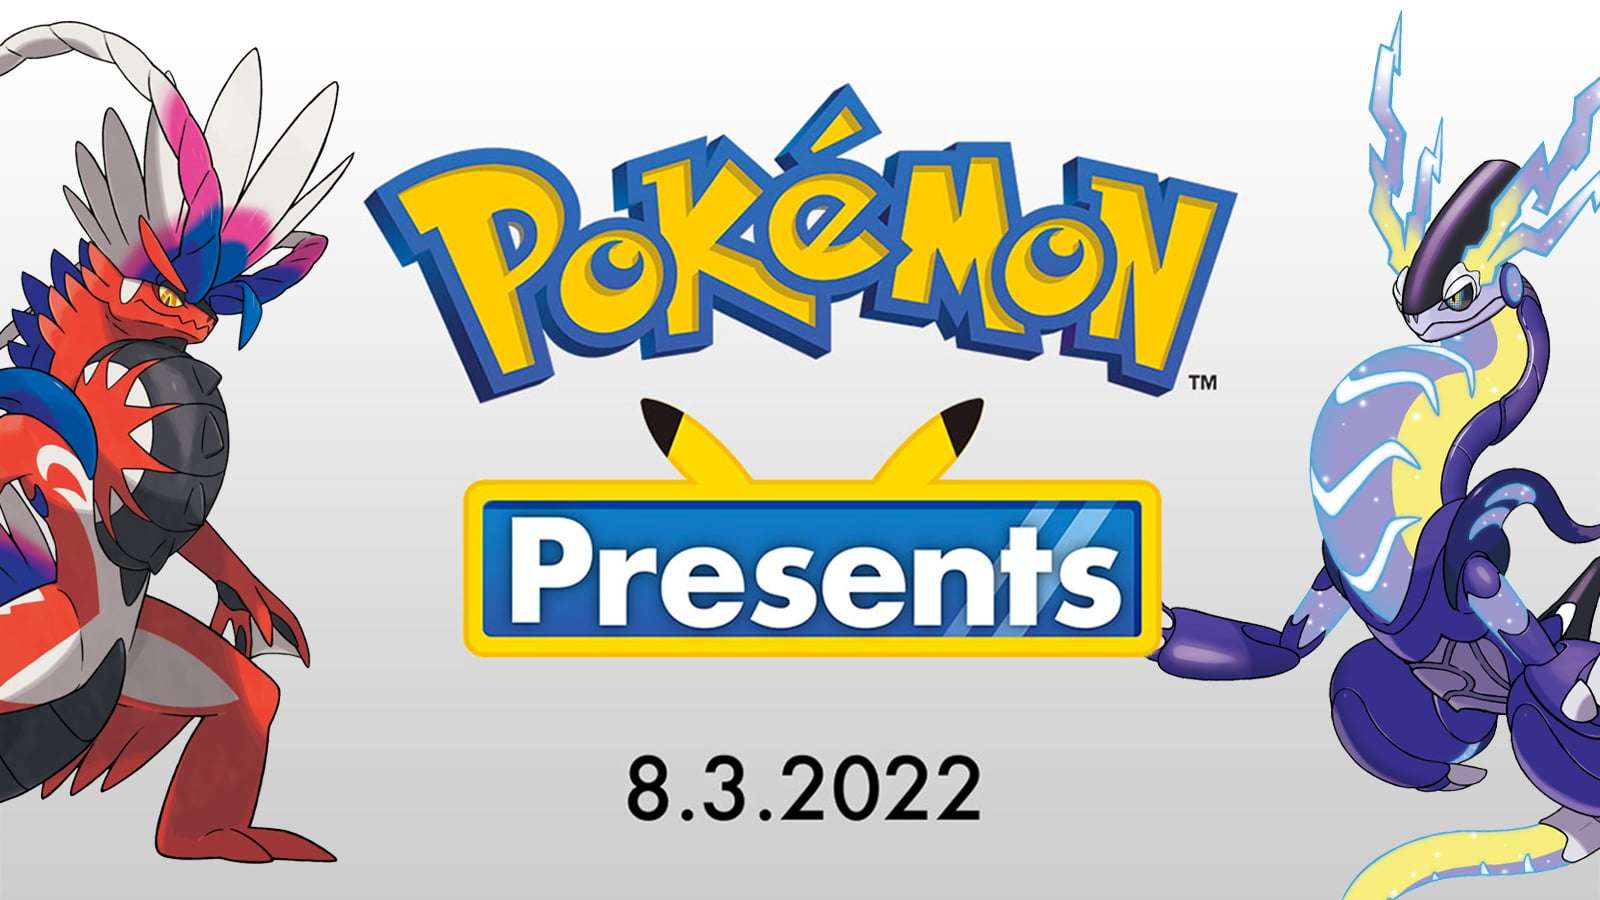 A poster for the August Pokemon Presents stream